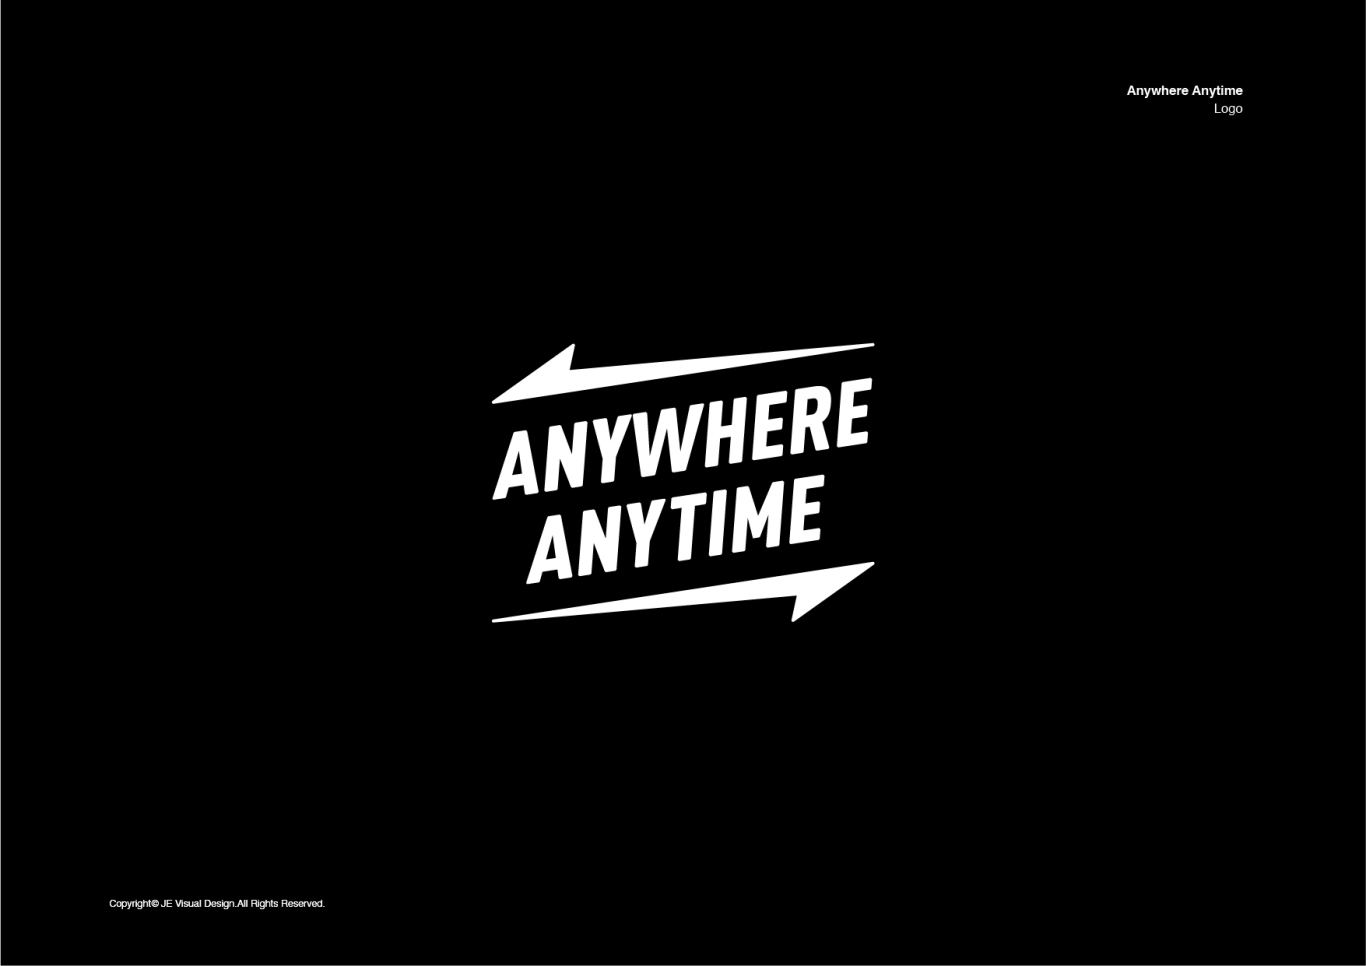 Anywhere Anytime logo设计图15